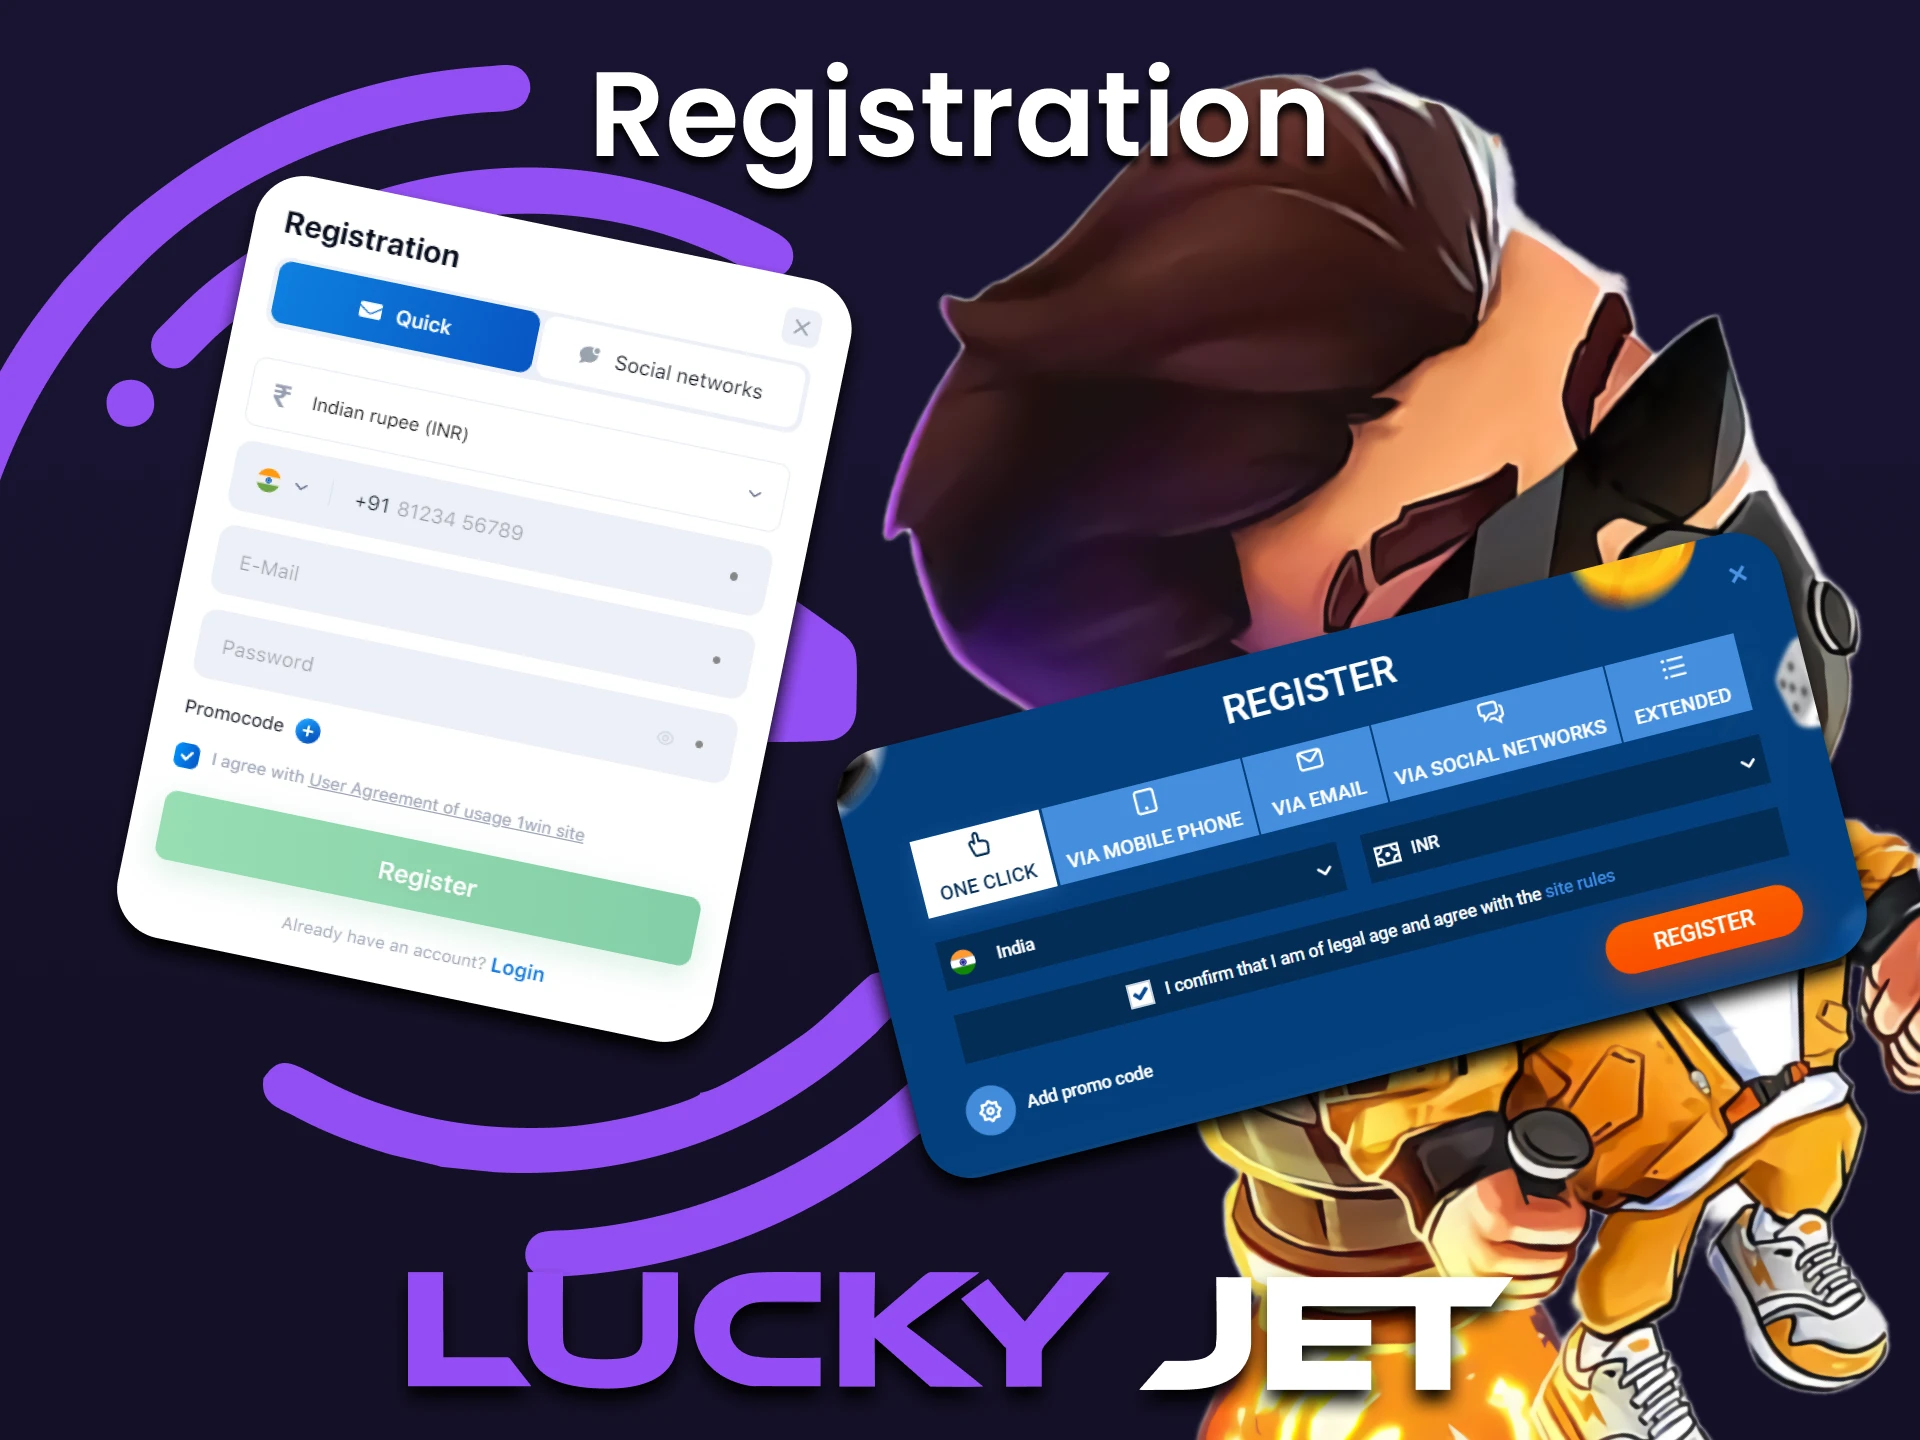 Create a personal account and start playing Lucky Jet.